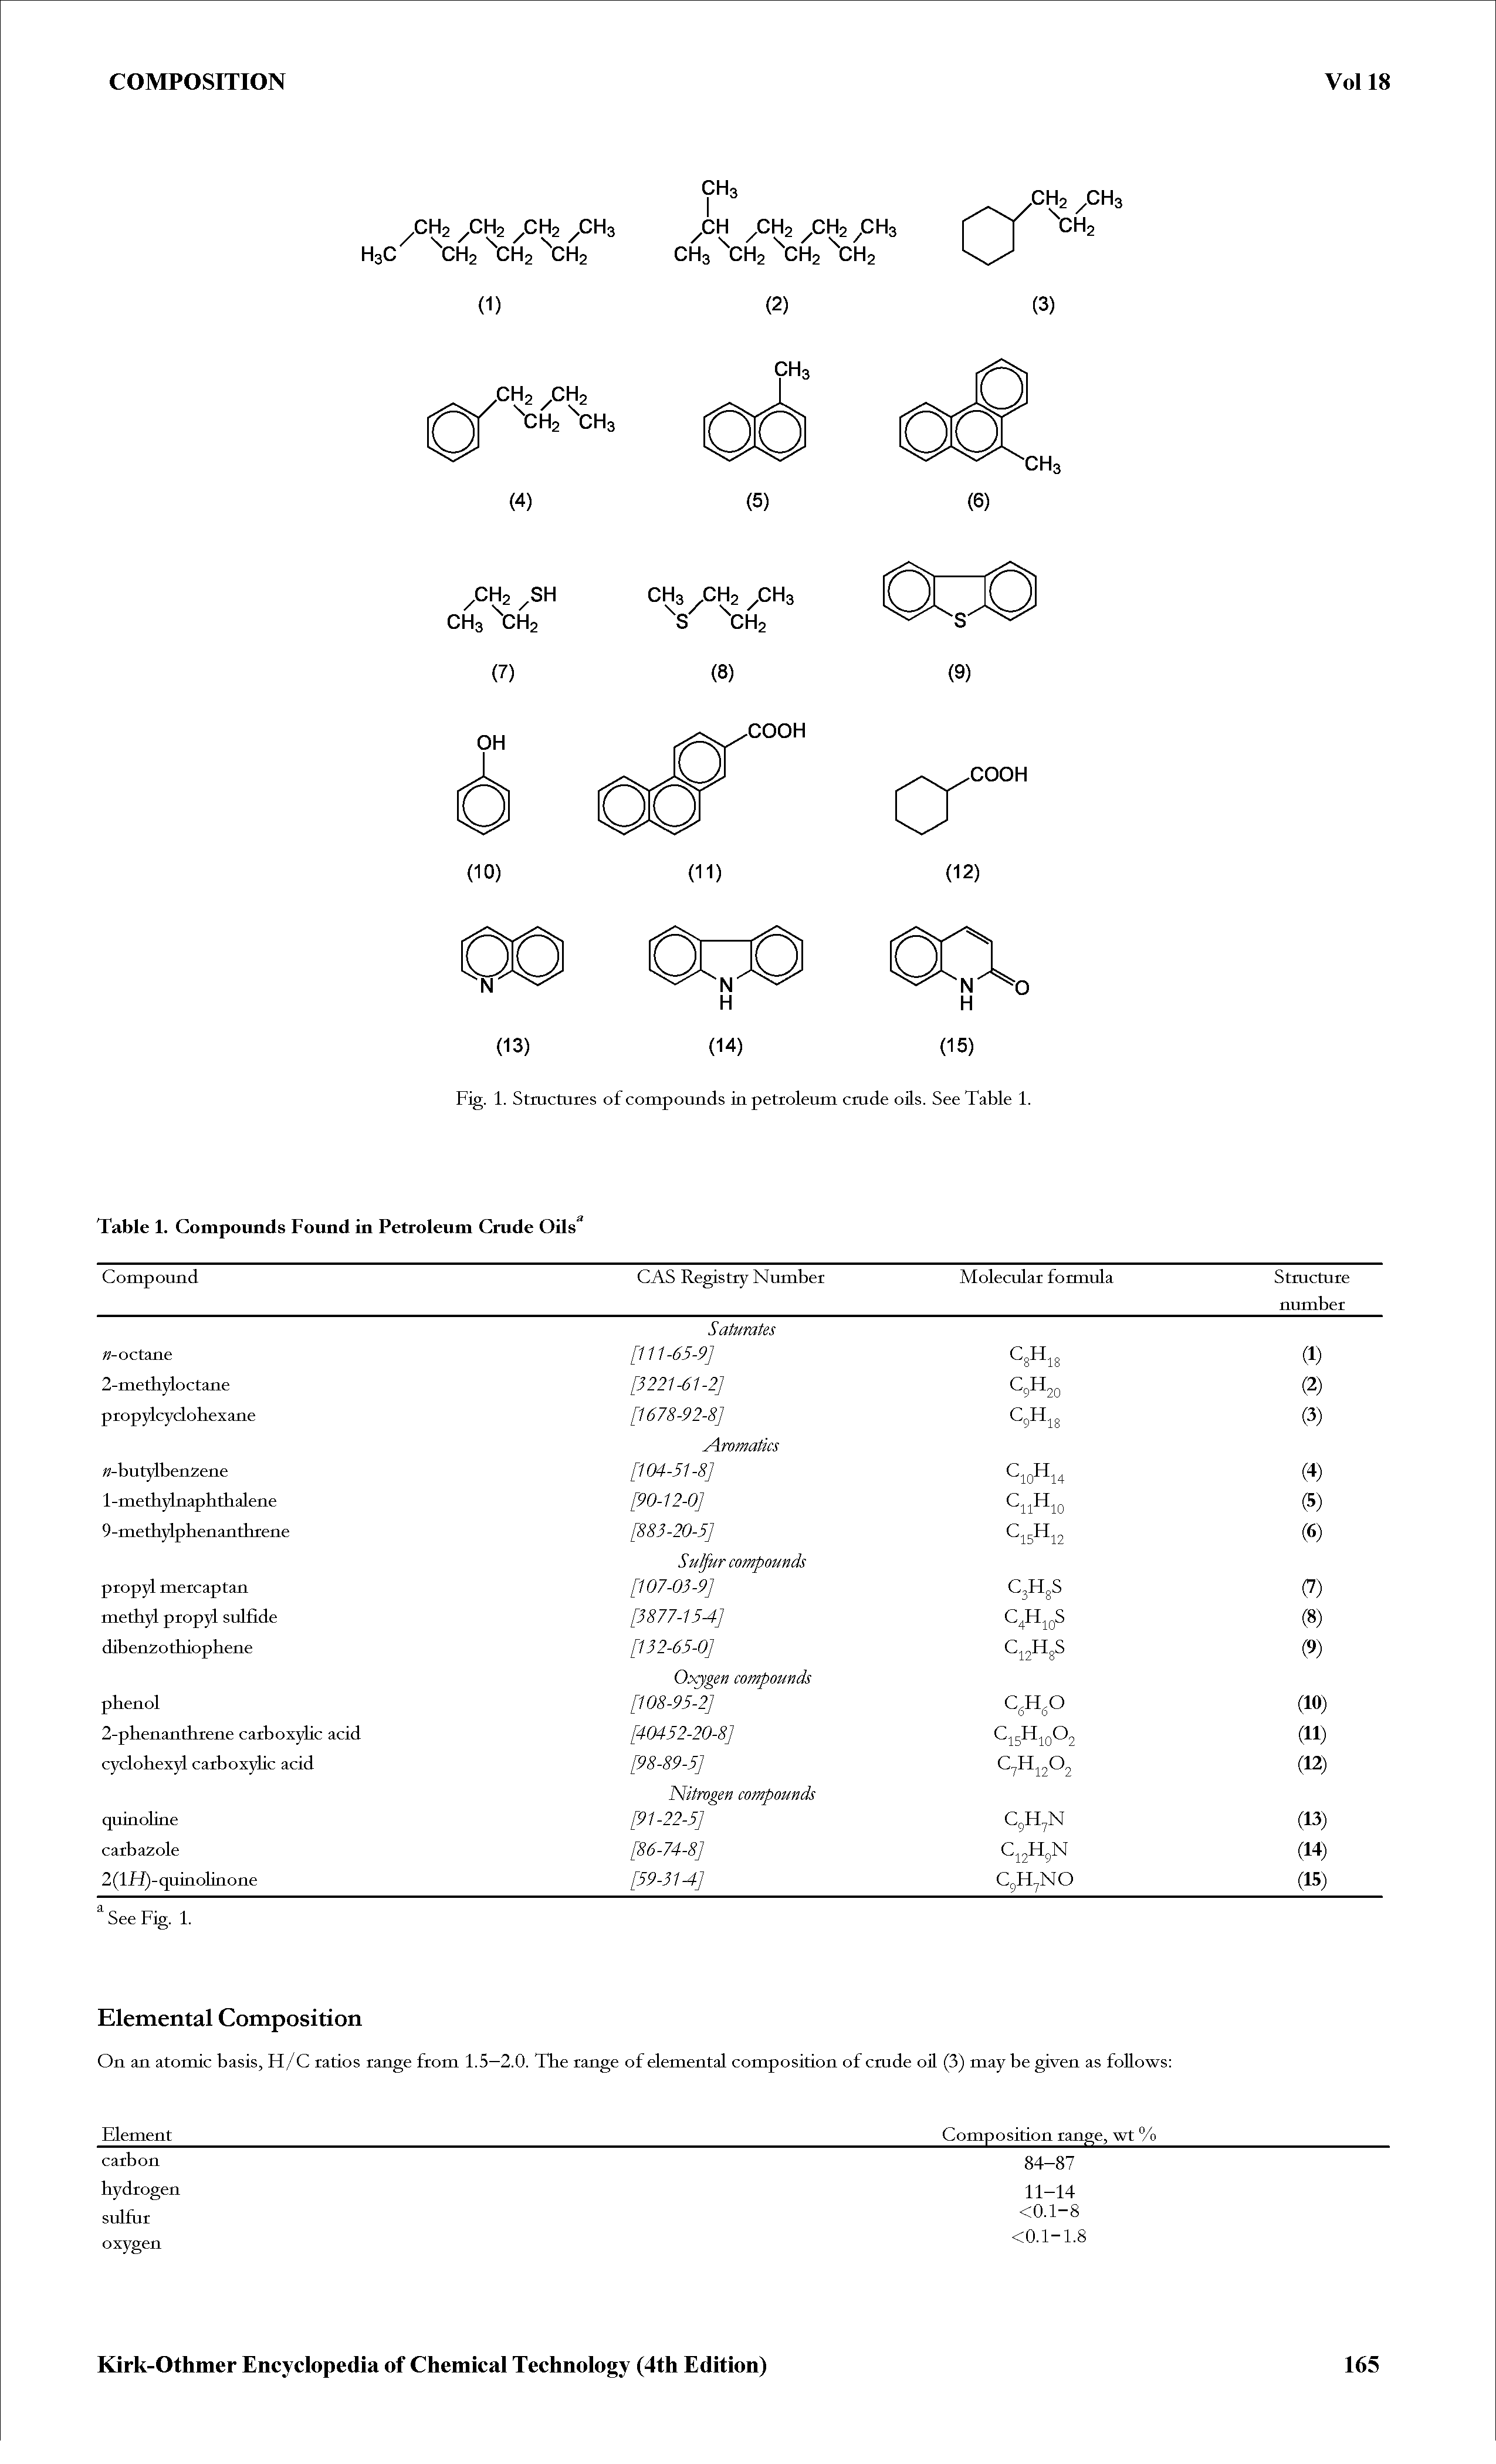 Fig. 1. Structures of compounds in petroleum cmde oils. See Table 1.